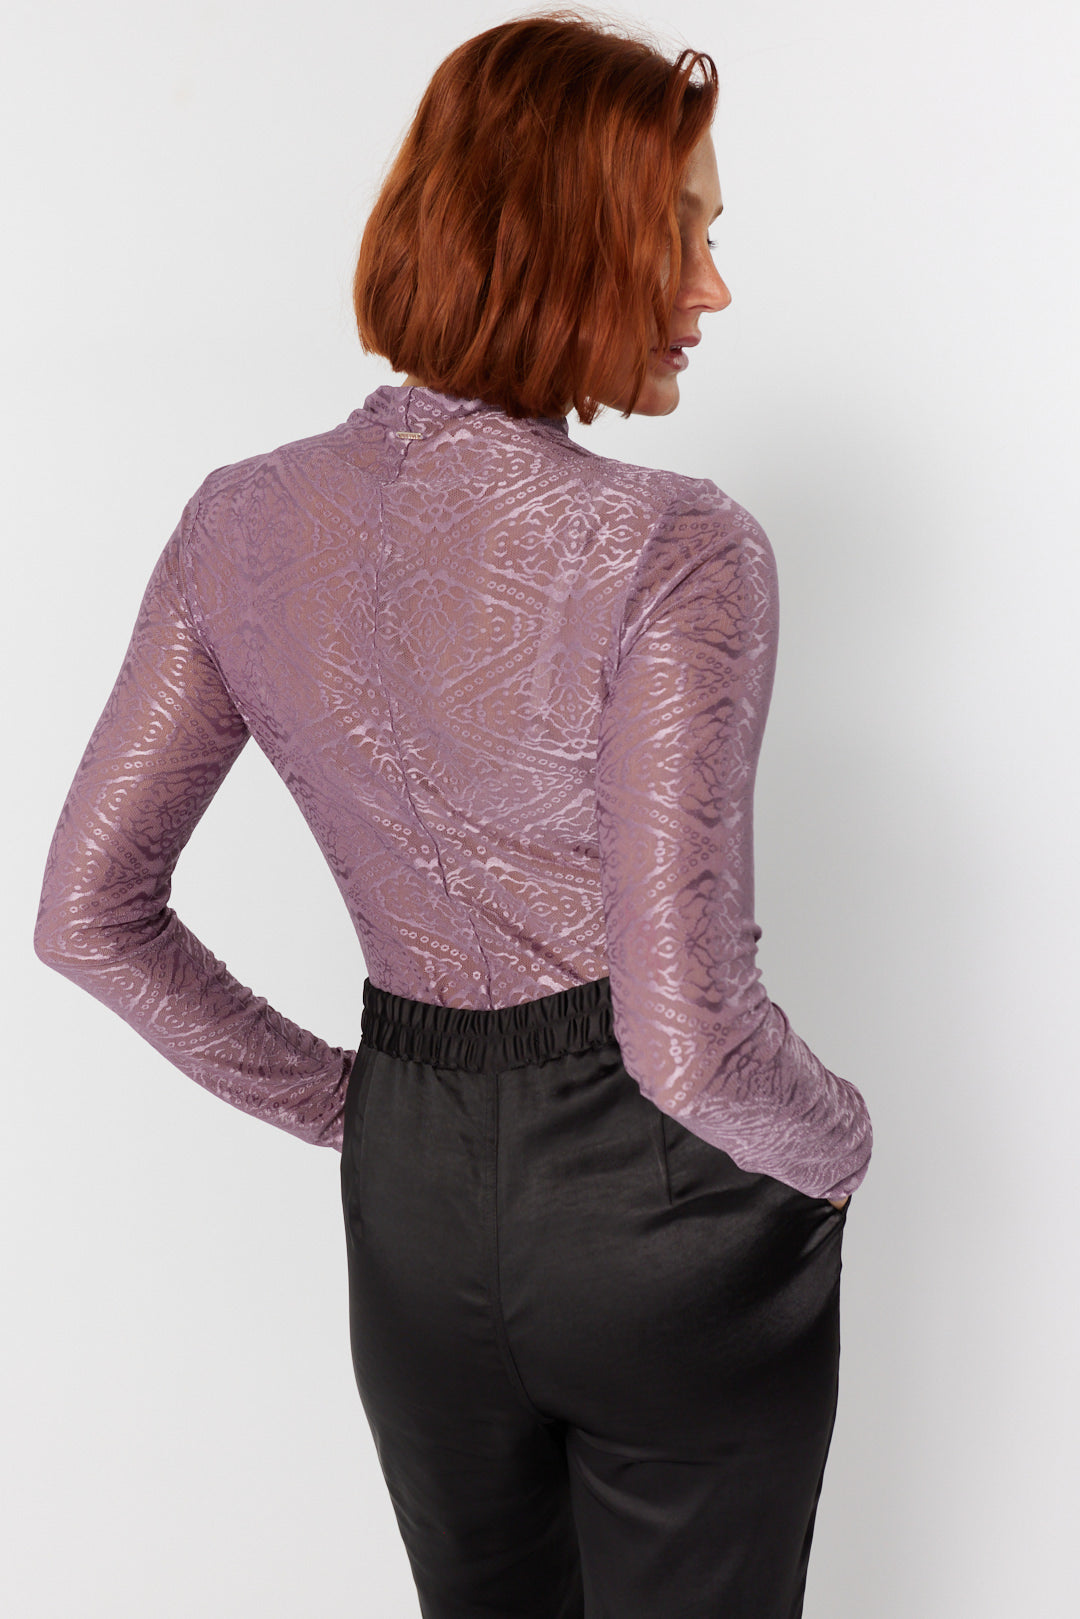 Purple textured lace sweater | ginger